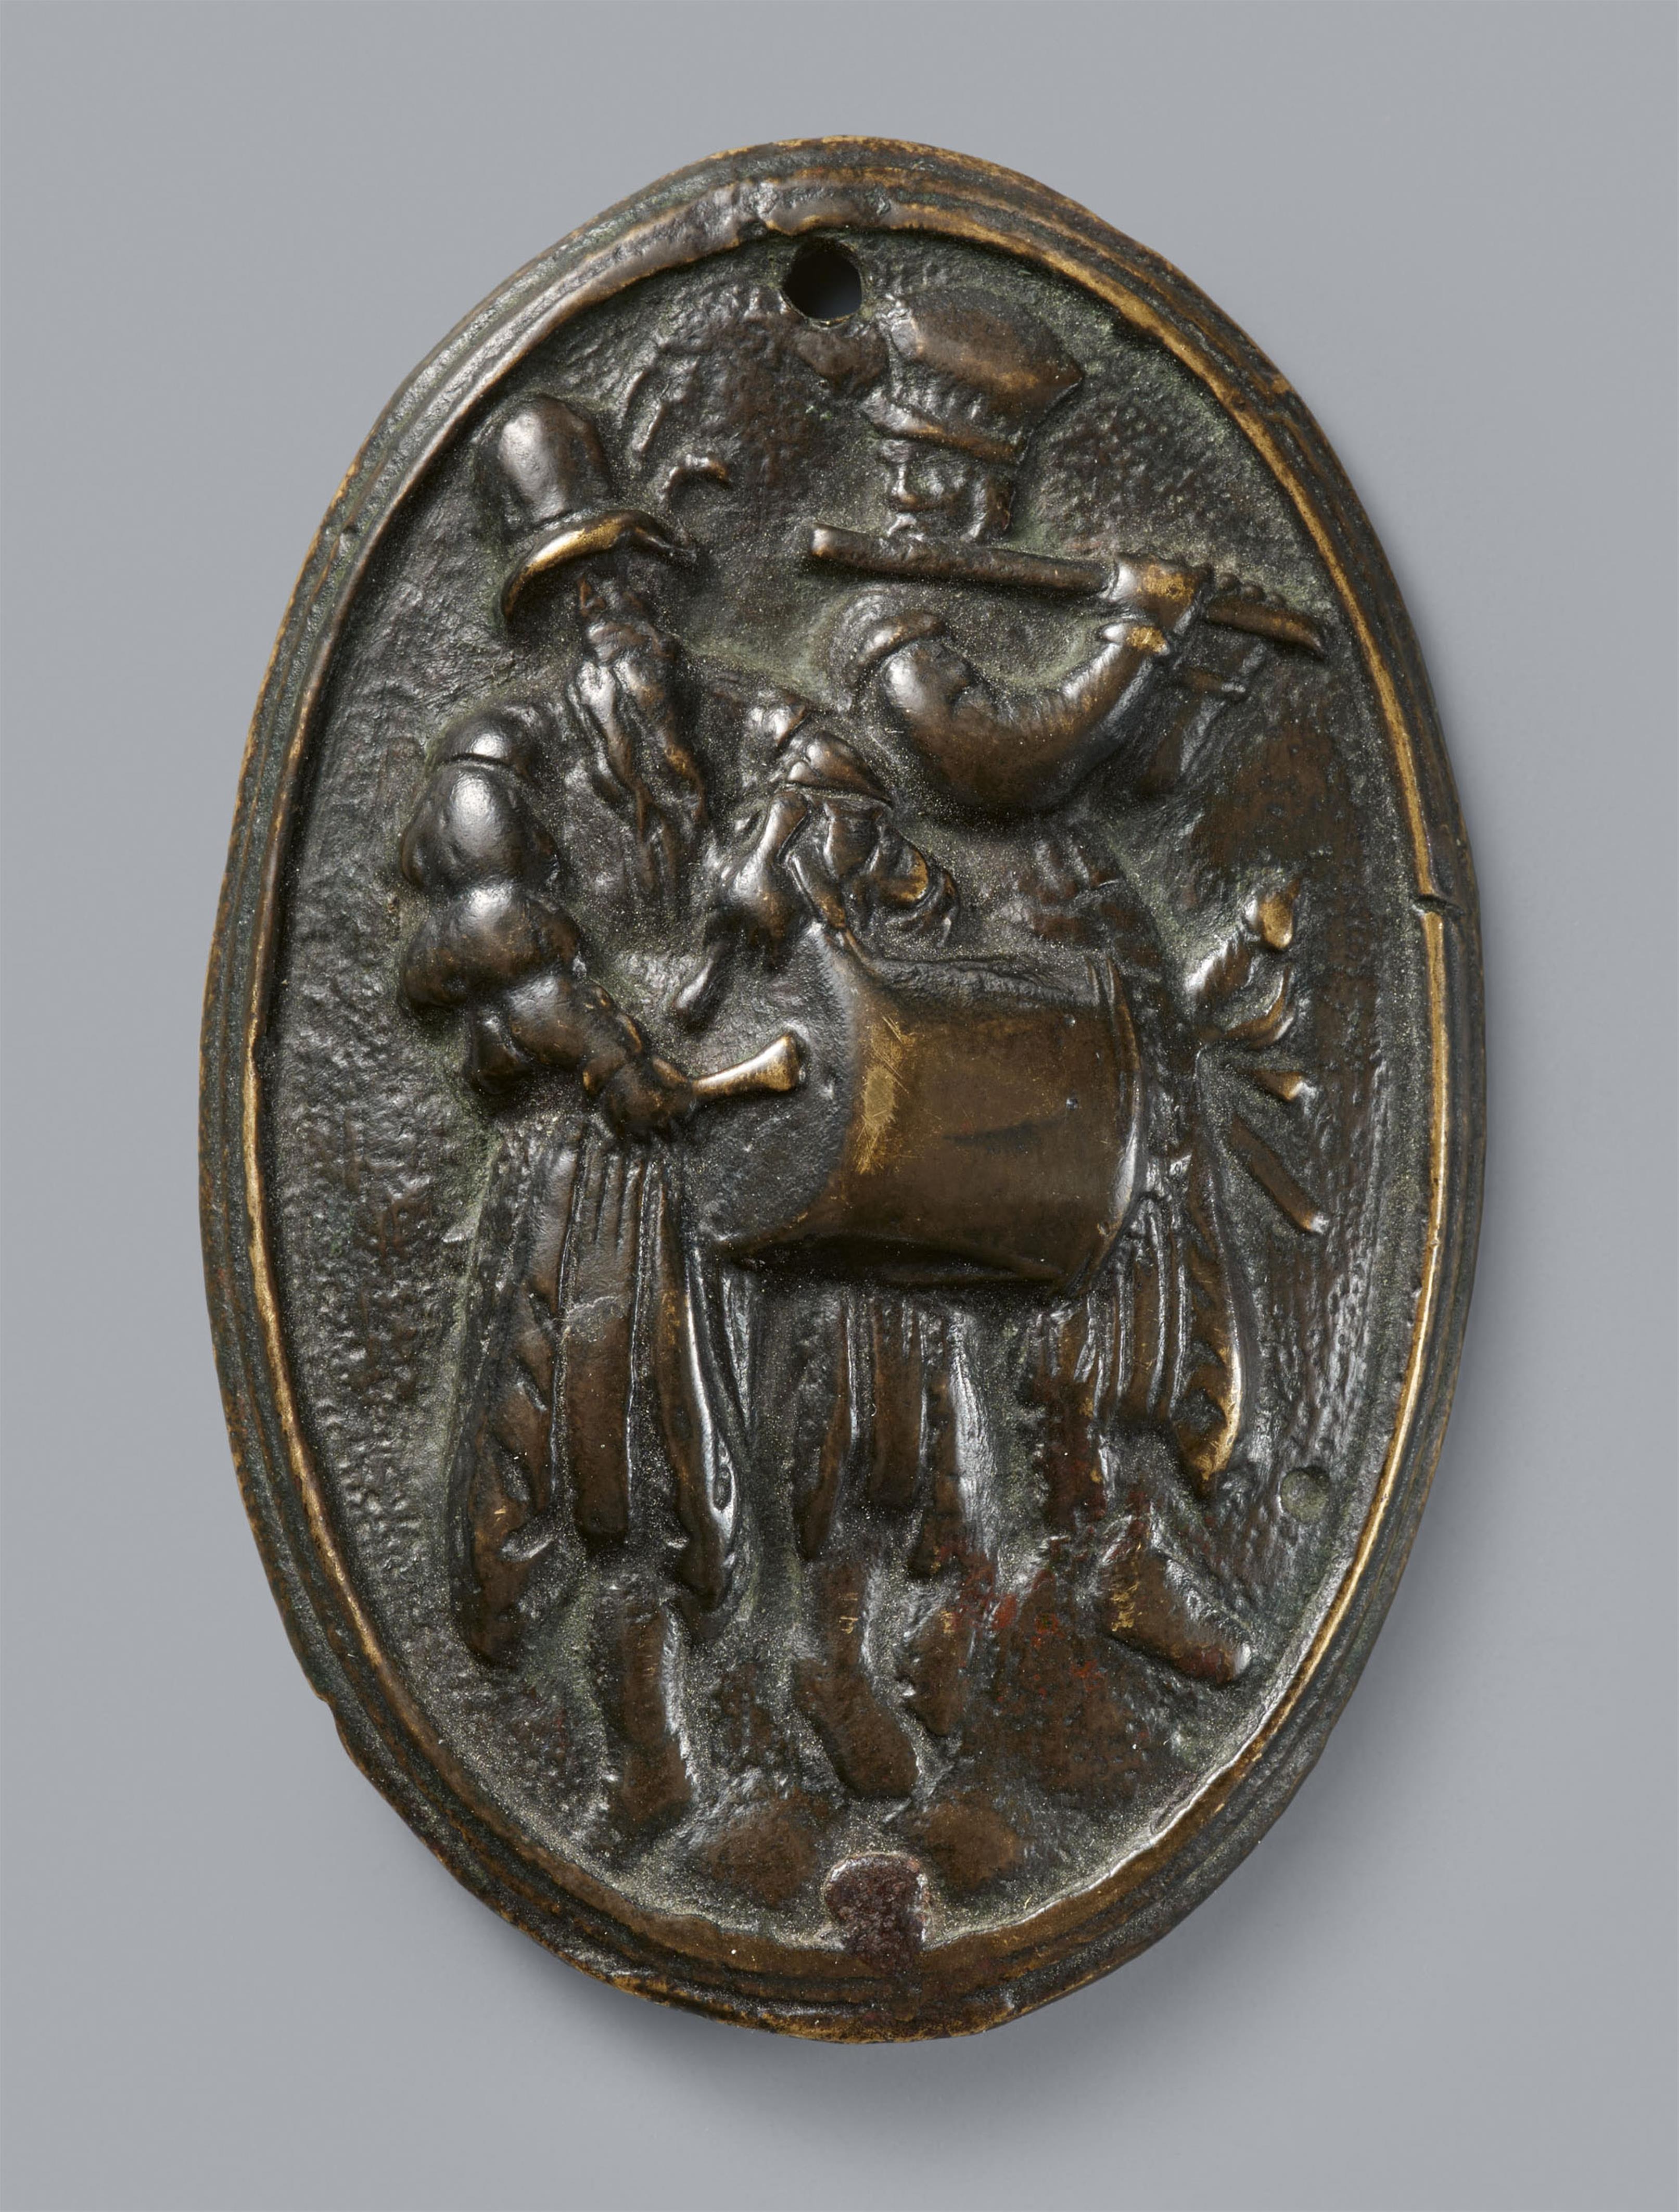 South German or Switzerland 3rd third 16th century - Bronze relief of a piper and drummer, South German or Swiss, last third 16th century - image-1